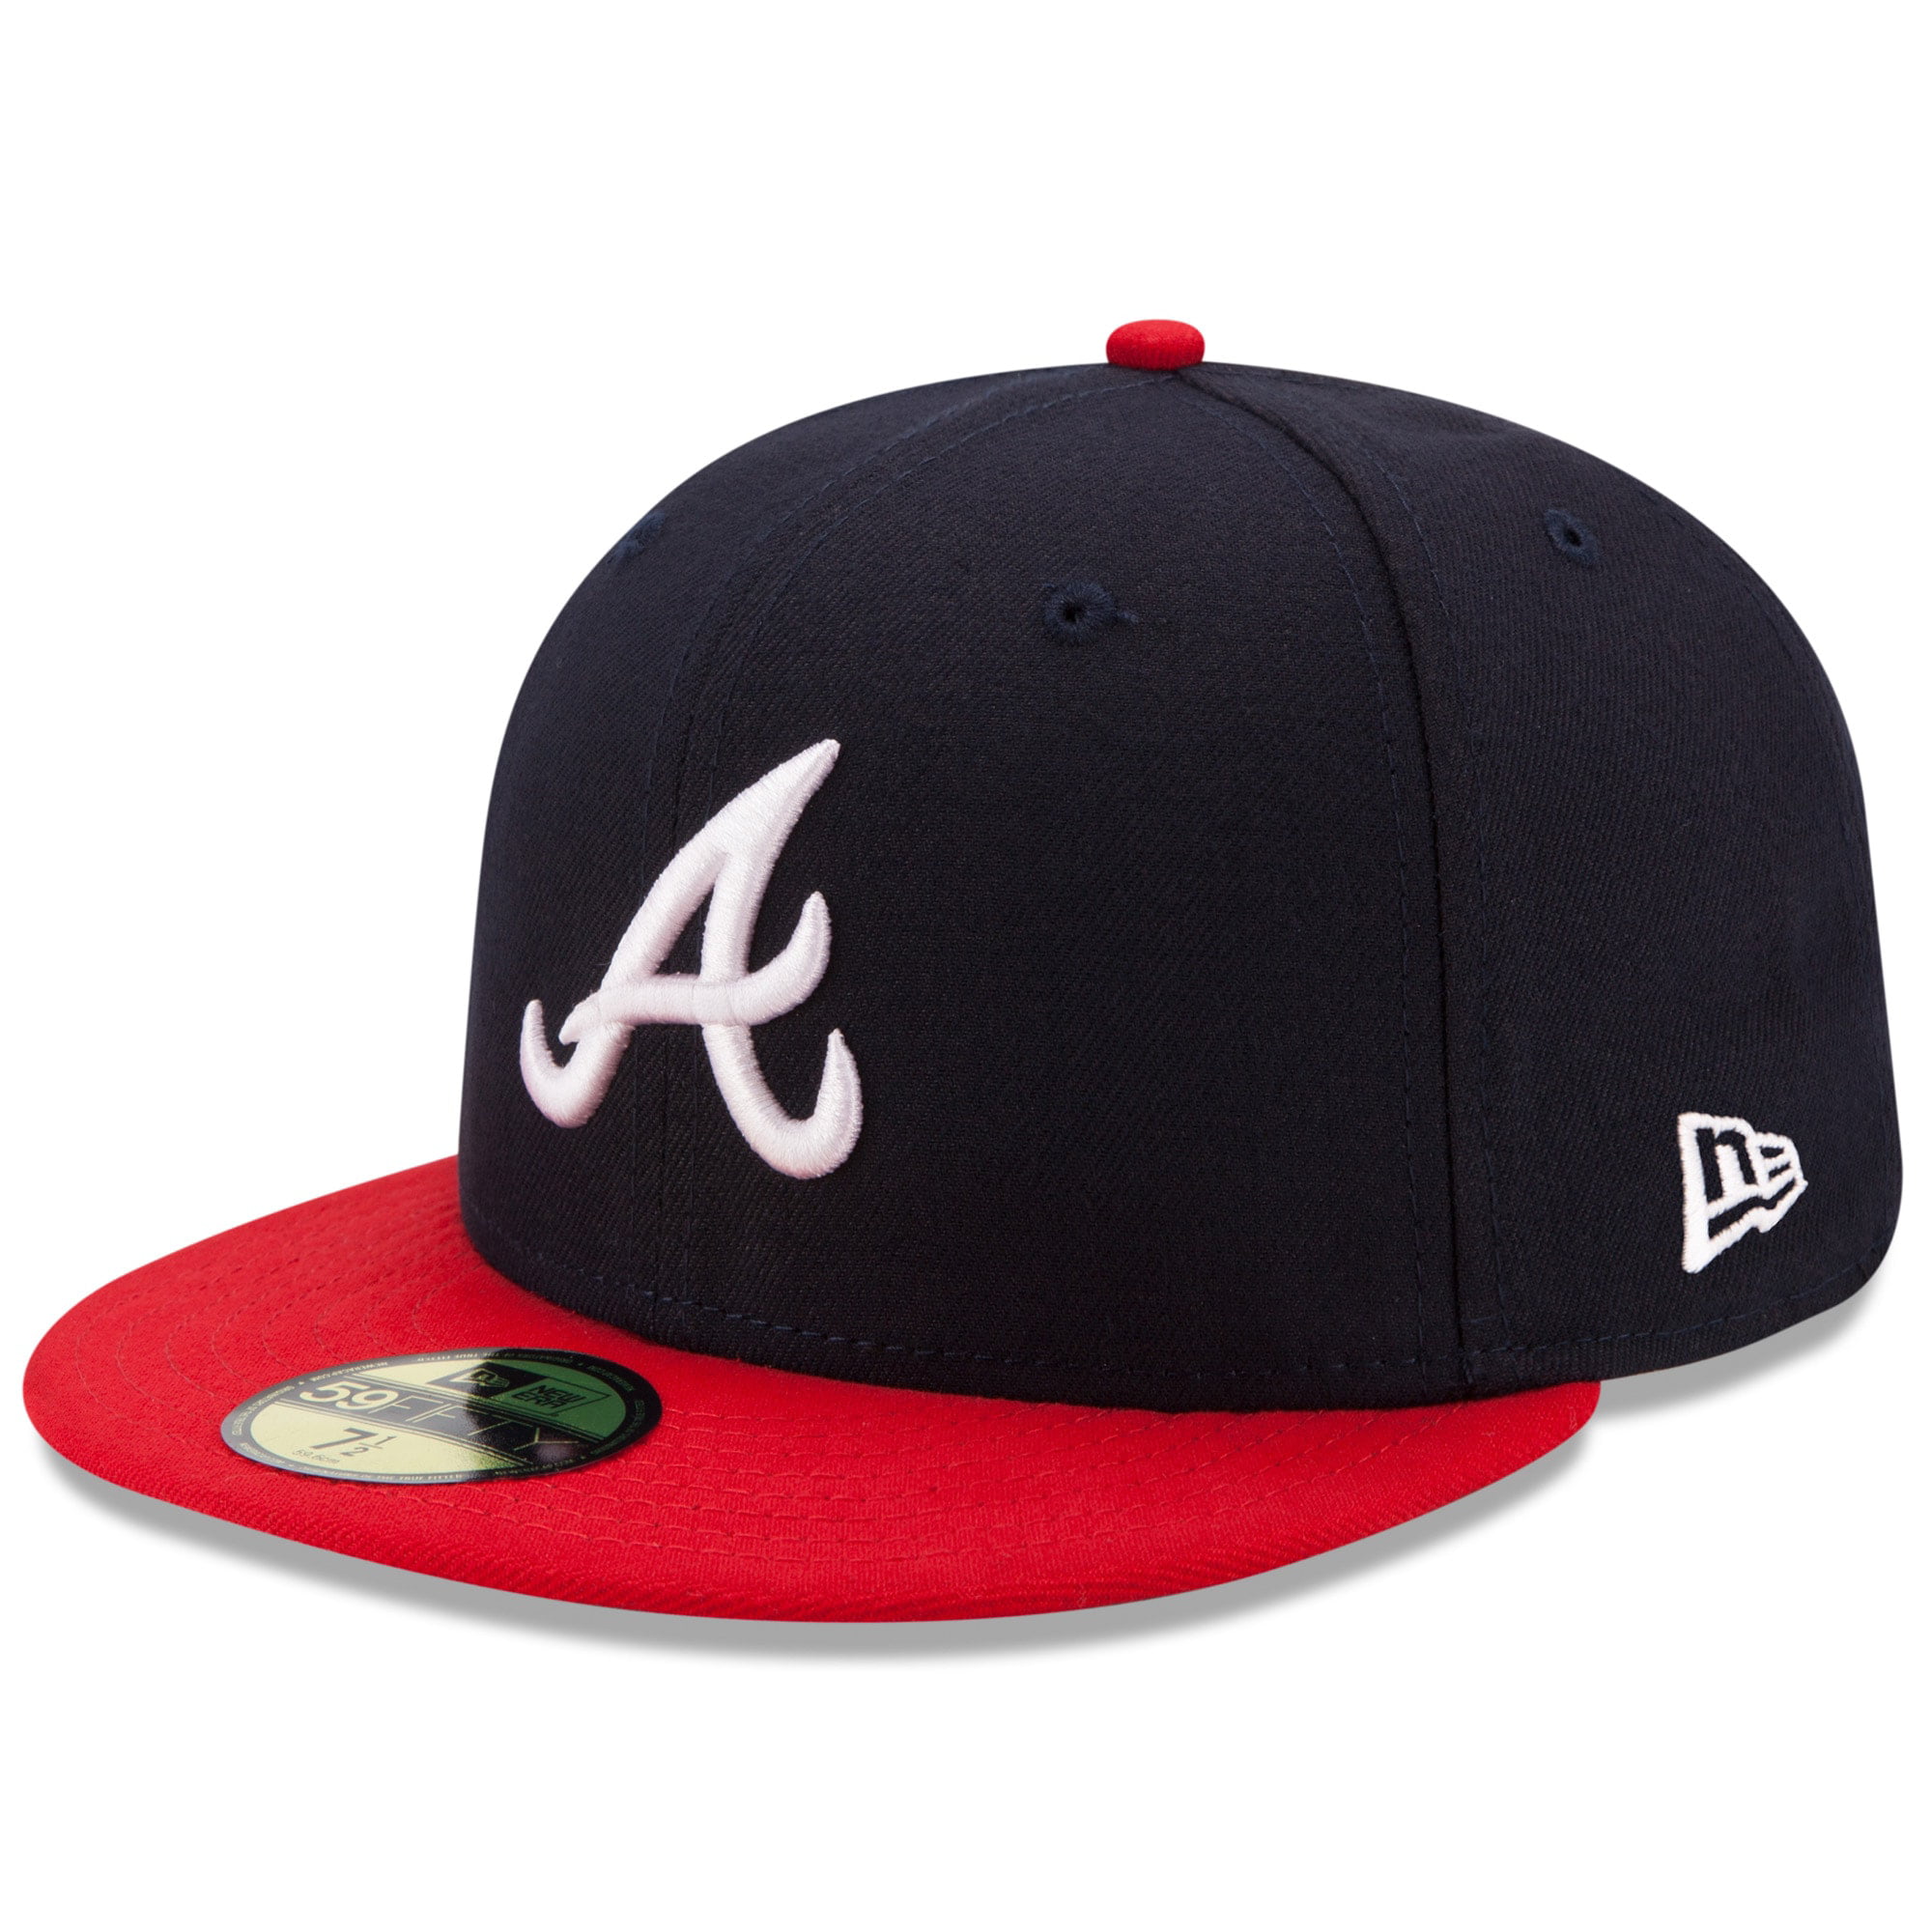 Atlanta Braves New Era Home Authentic Collection On-Field 59FIFTY